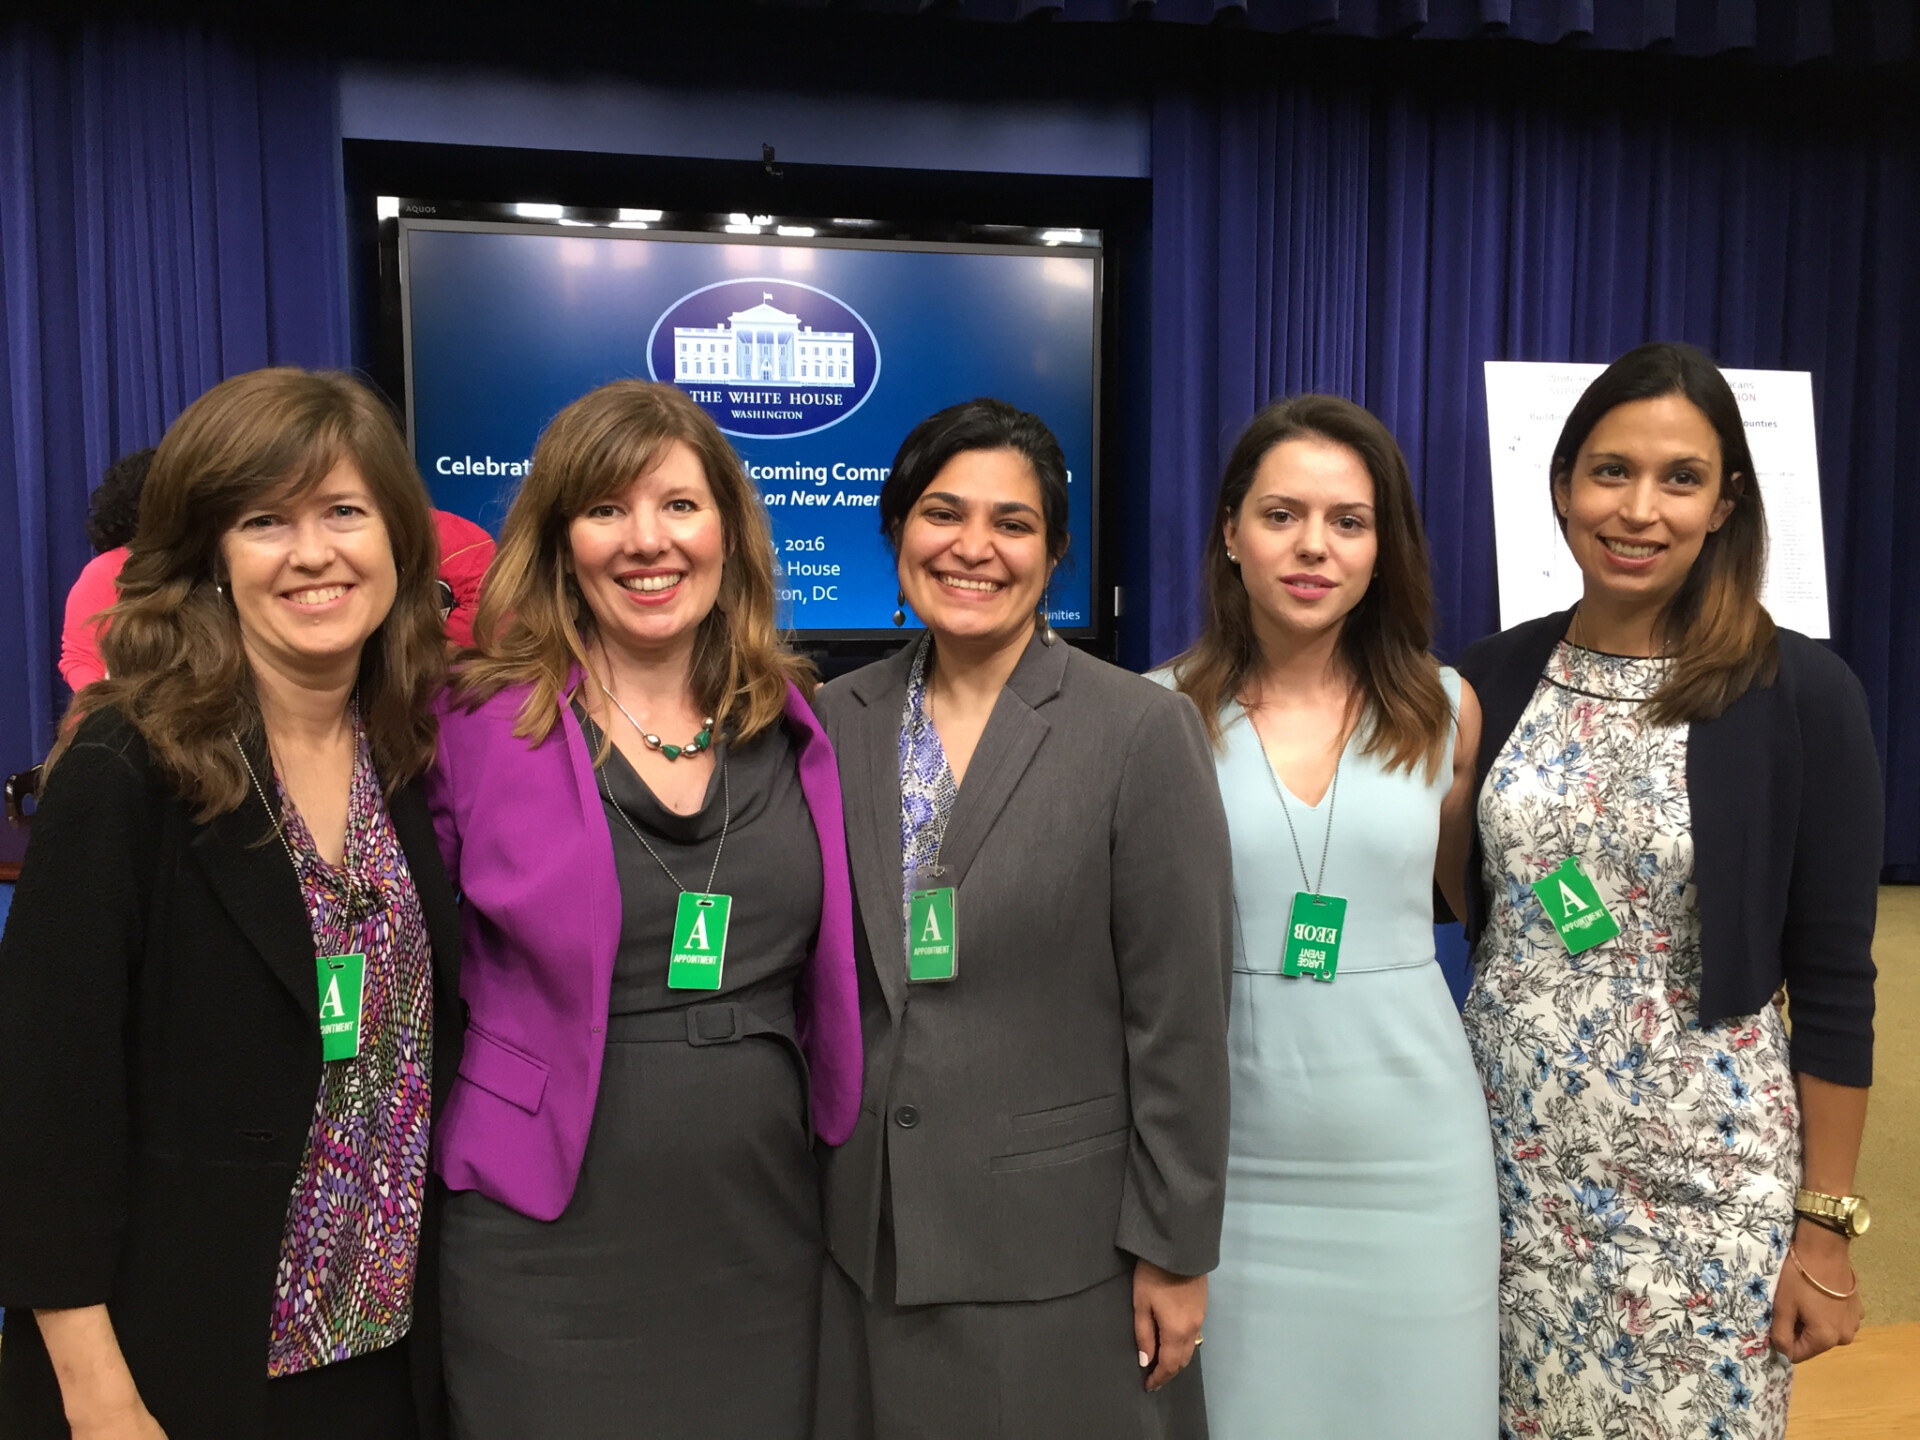 Group photo taken inside the White House, including Rachel Perić (second from the left) and Isha Lee (middle)